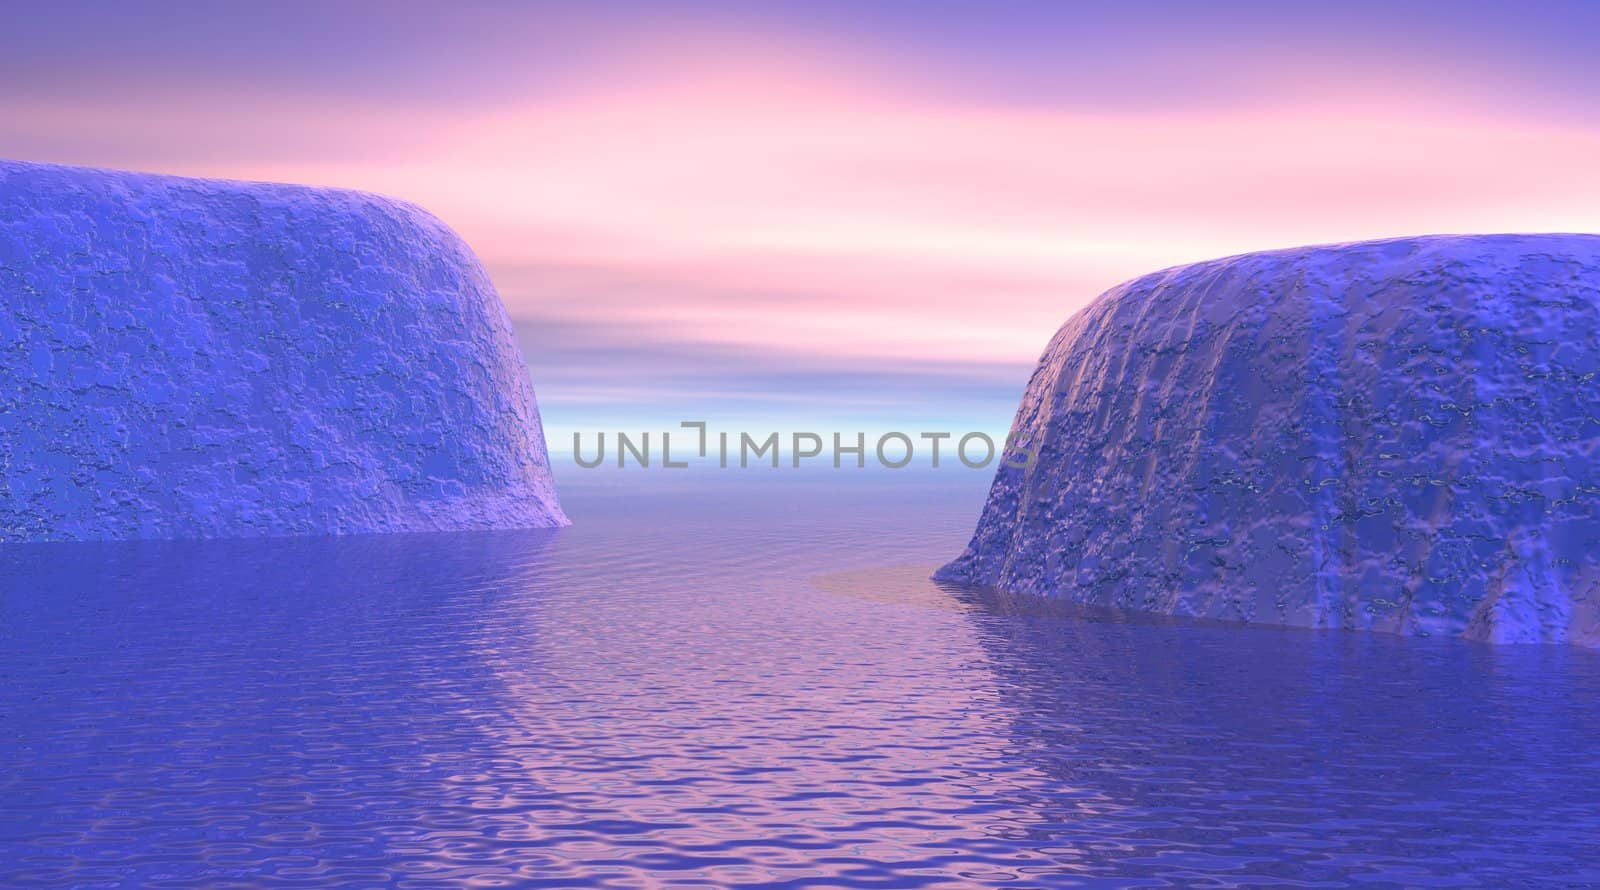 Two icebergs in front of of the other and reflecting in the ocean by sunrise cloudy sky light